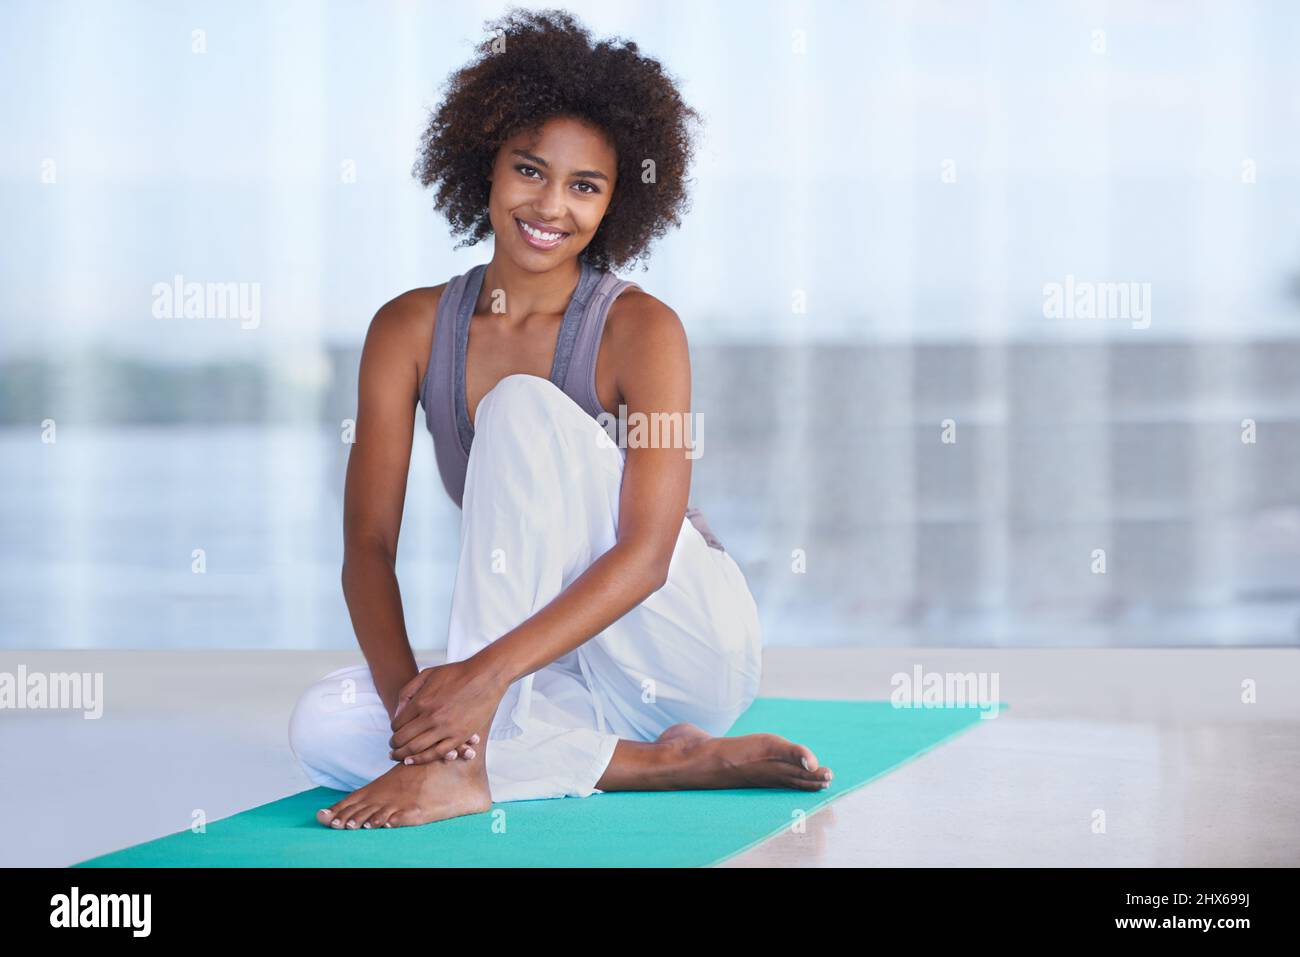 Exercise makes me smile. Shot of an attractive young woman sitting on an exercise mat. Stock Photo